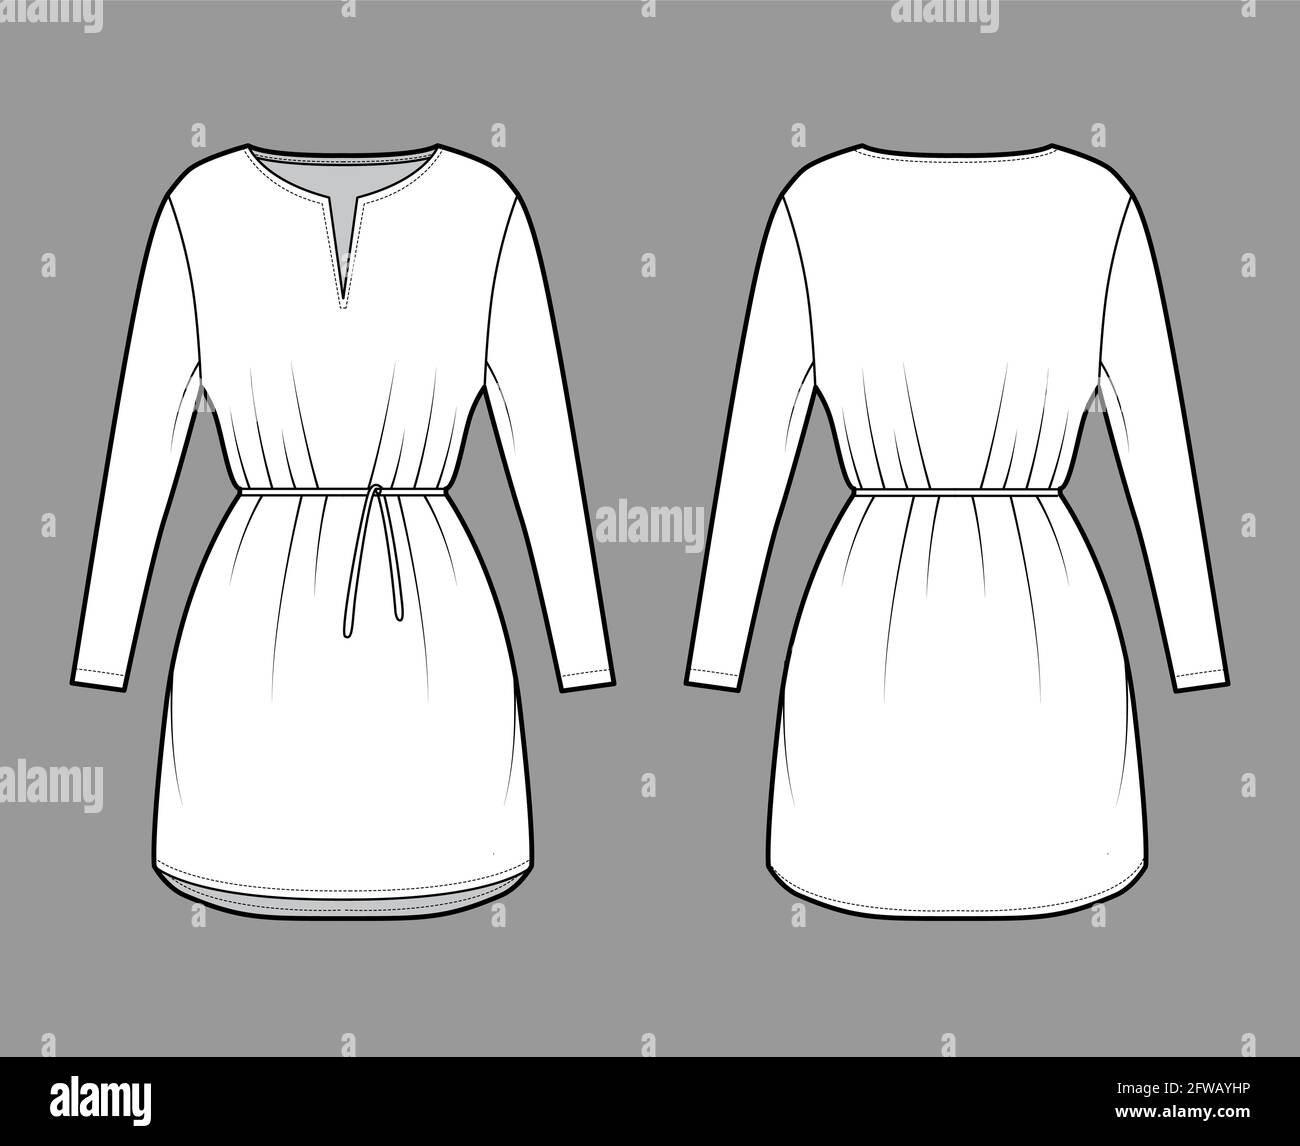 Dress tunic technical fashion illustration with tie, long sleeves, oversized body, mini length skirt, slashed neck. Flat apparel front, back, white color style. Women, men CAD mockup Stock Vector